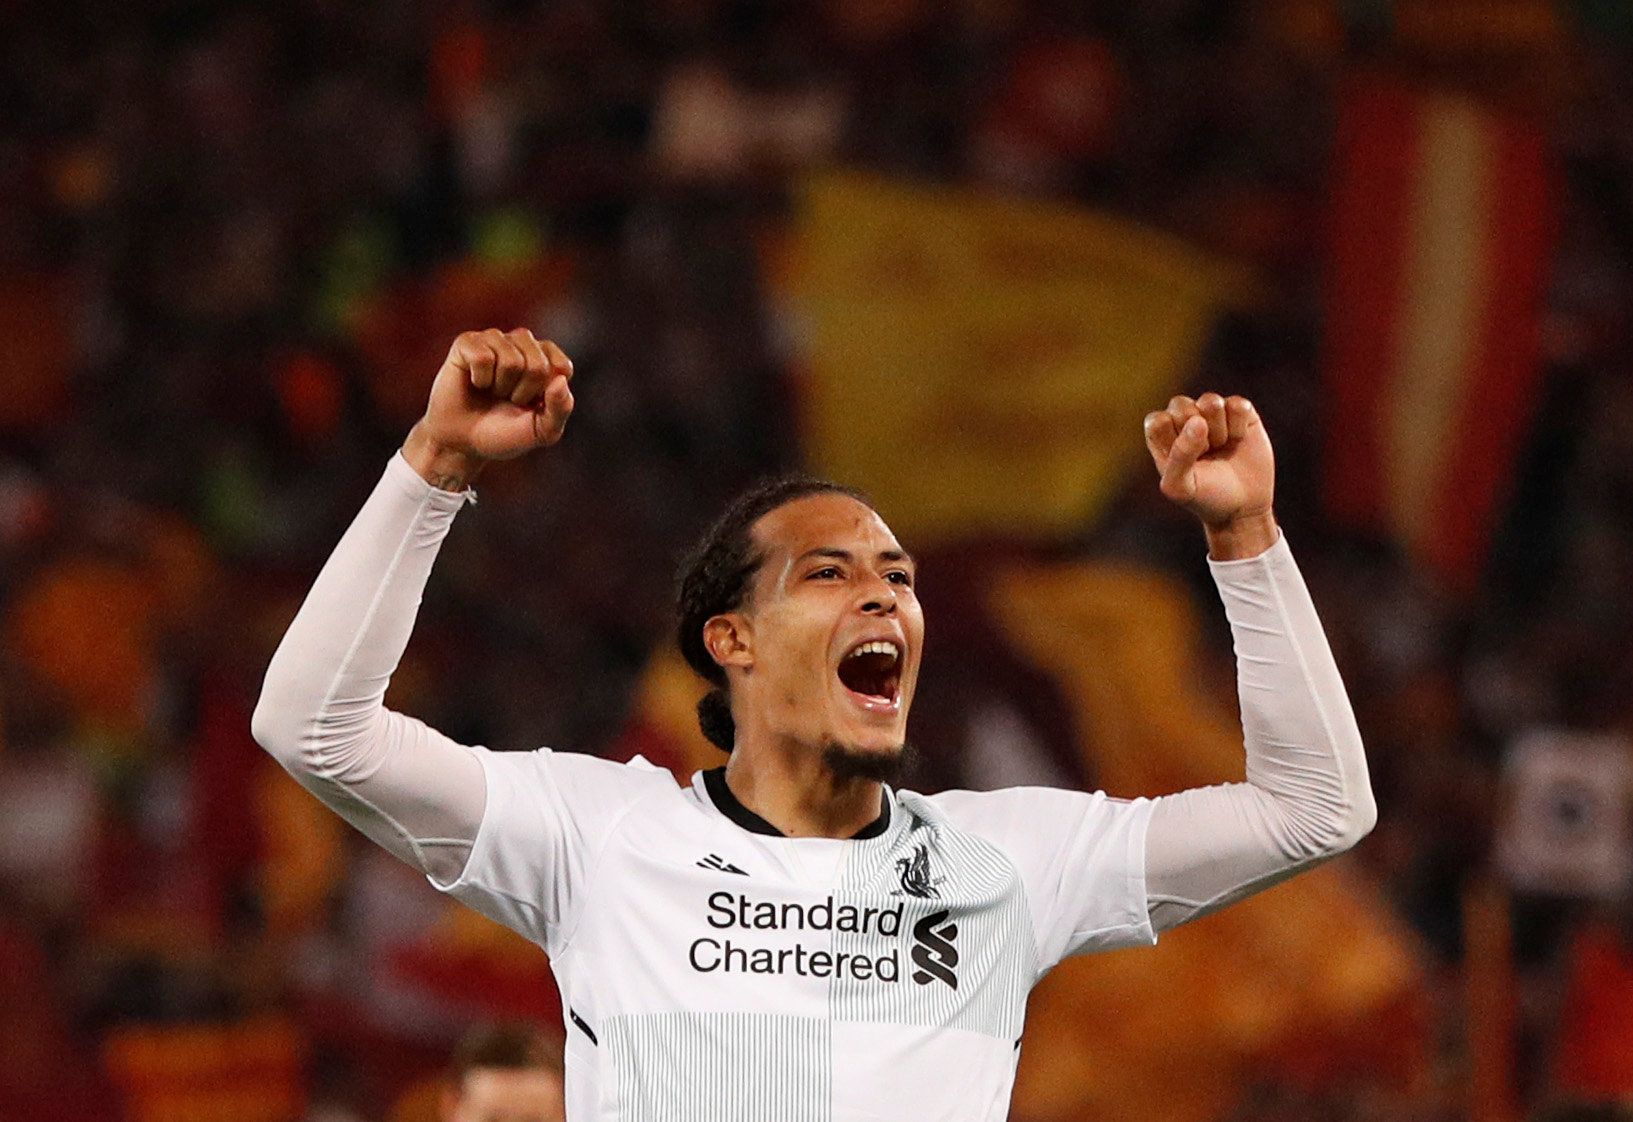 Soccer Football - Champions League Semi Final Second Leg - AS Roma v Liverpool - Stadio Olimpico, Rome, Italy - May 2, 2018  Liverpool's Virgil van Dijk celebrates after the match  Action Images via Reuters/John Sibley